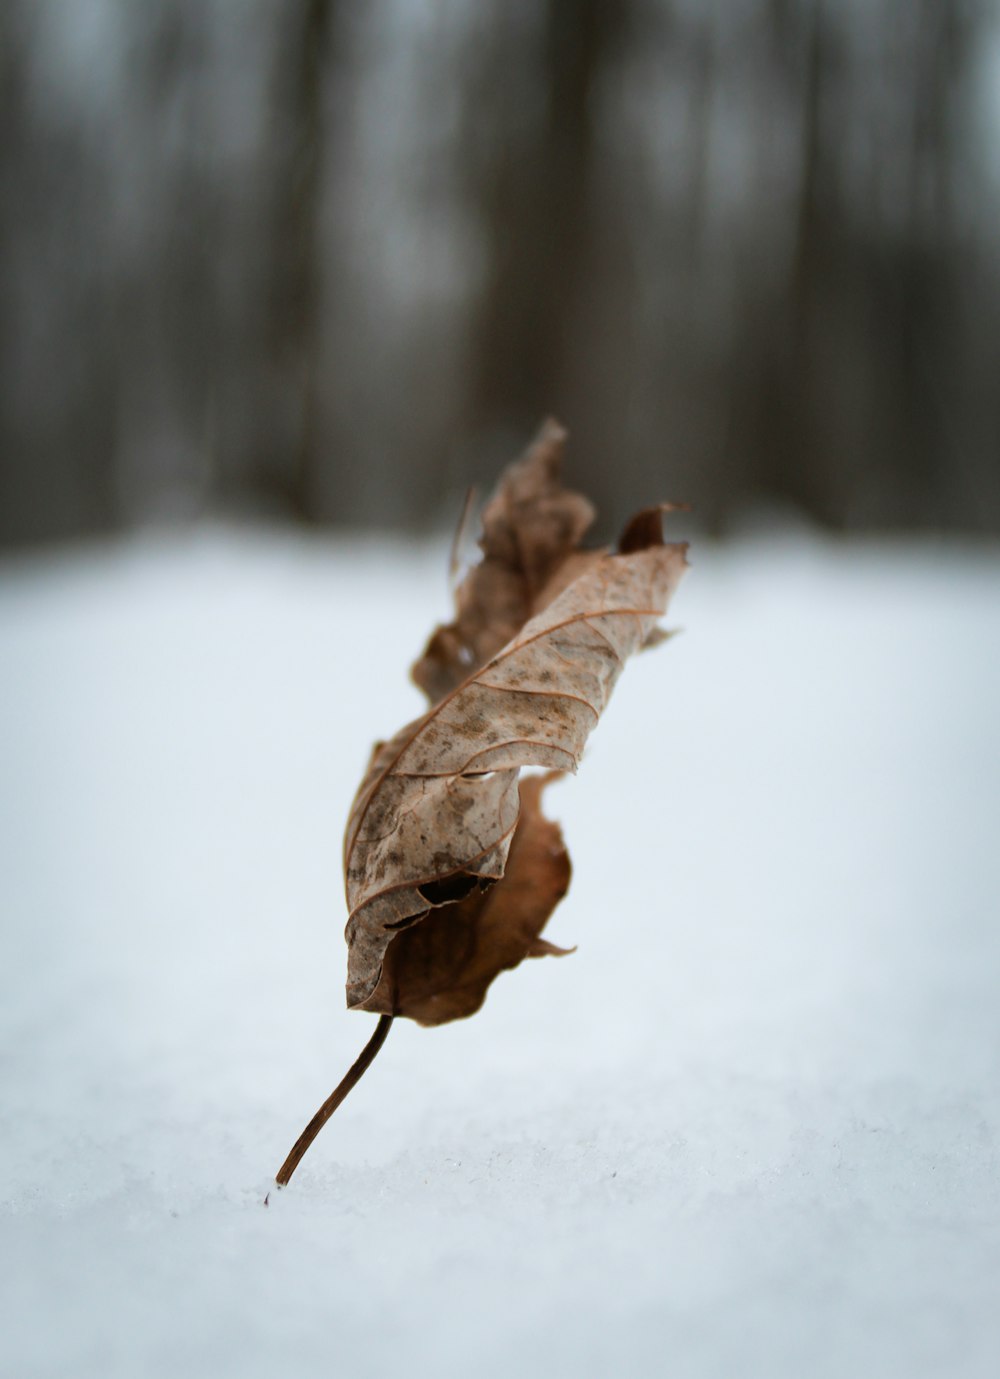 a dried leaf on a snowy surface with trees in the background